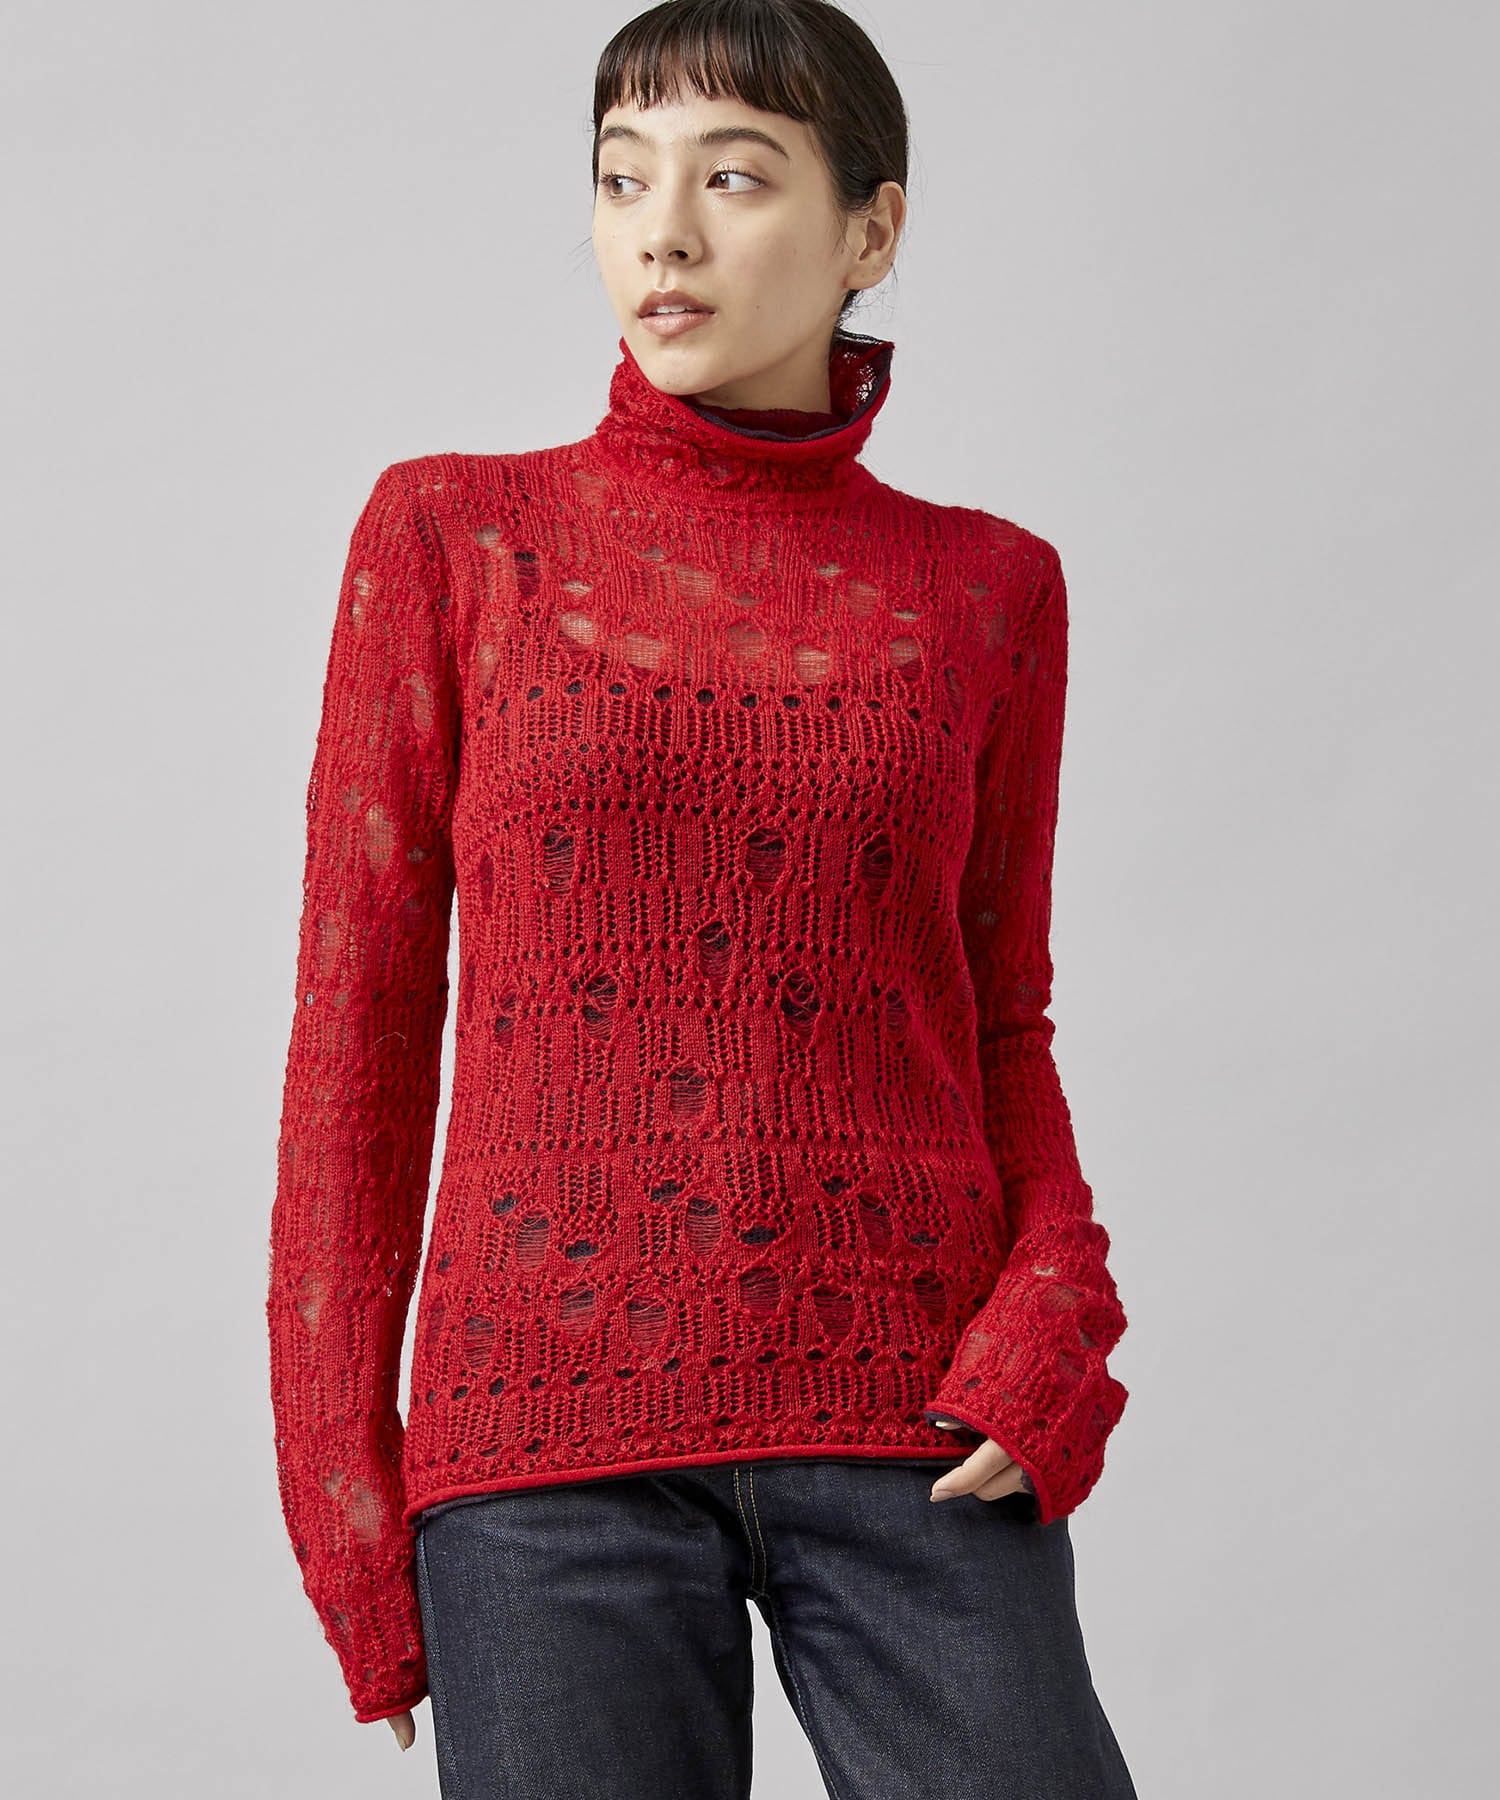 mohair lace knitting high neck pullover